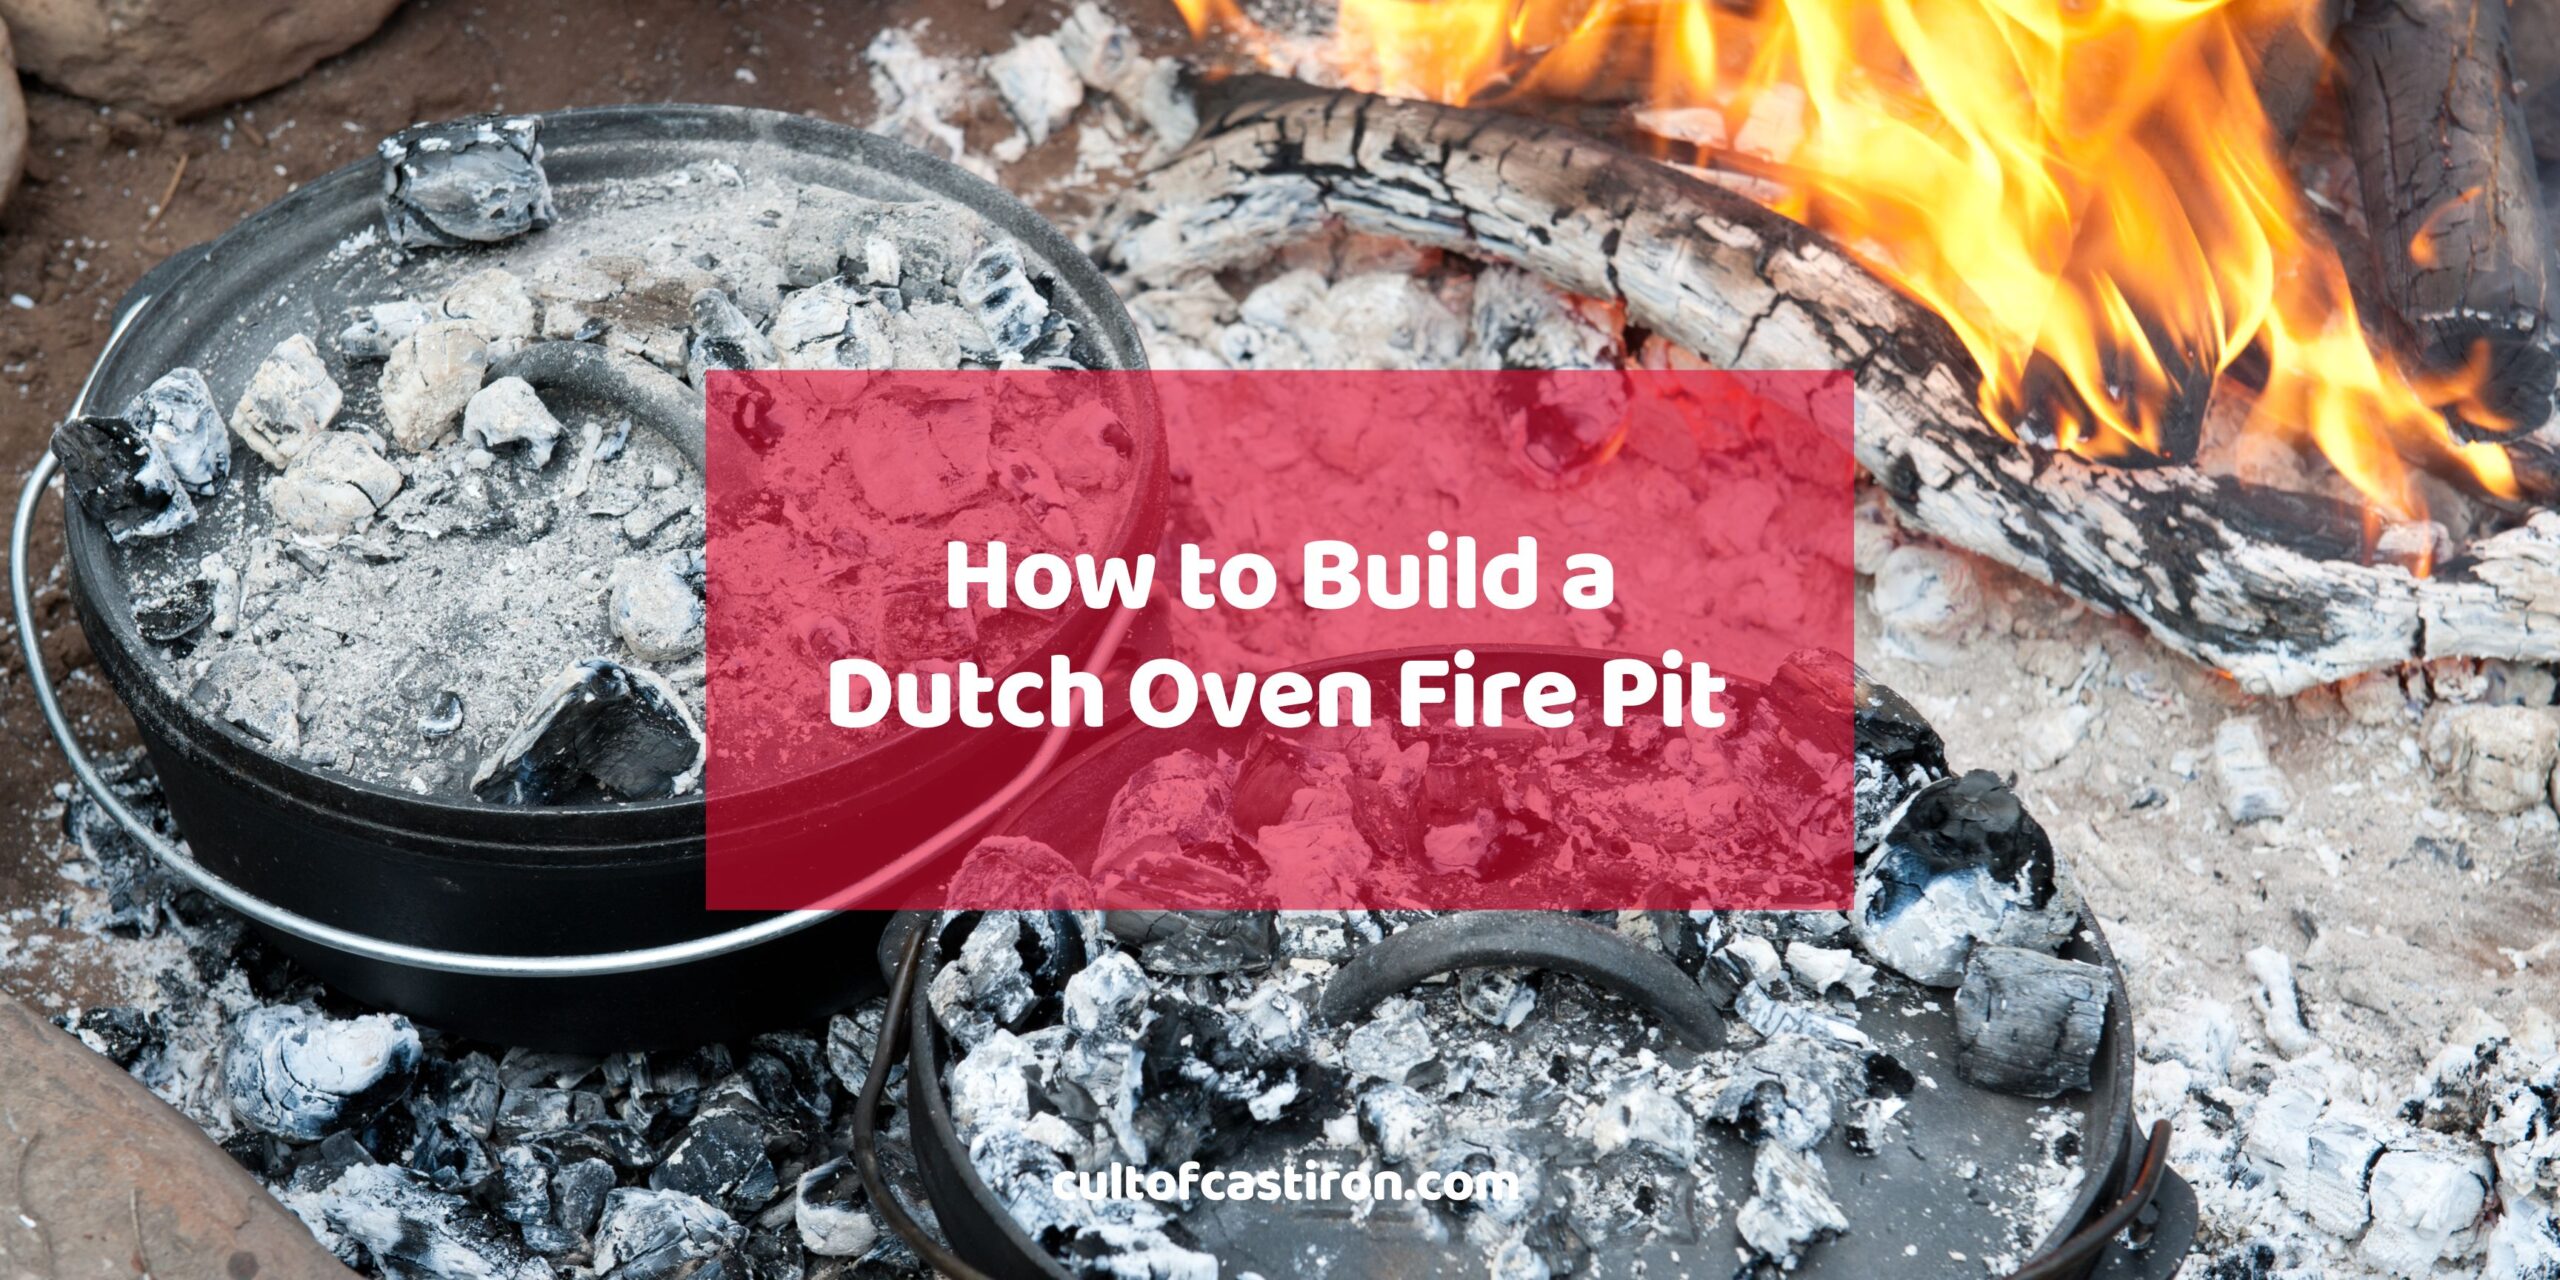 https://cultofcastiron.com/wp-content/uploads/2023/10/how-to-make-a-dutch-oven-fire-pit-scaled.jpg